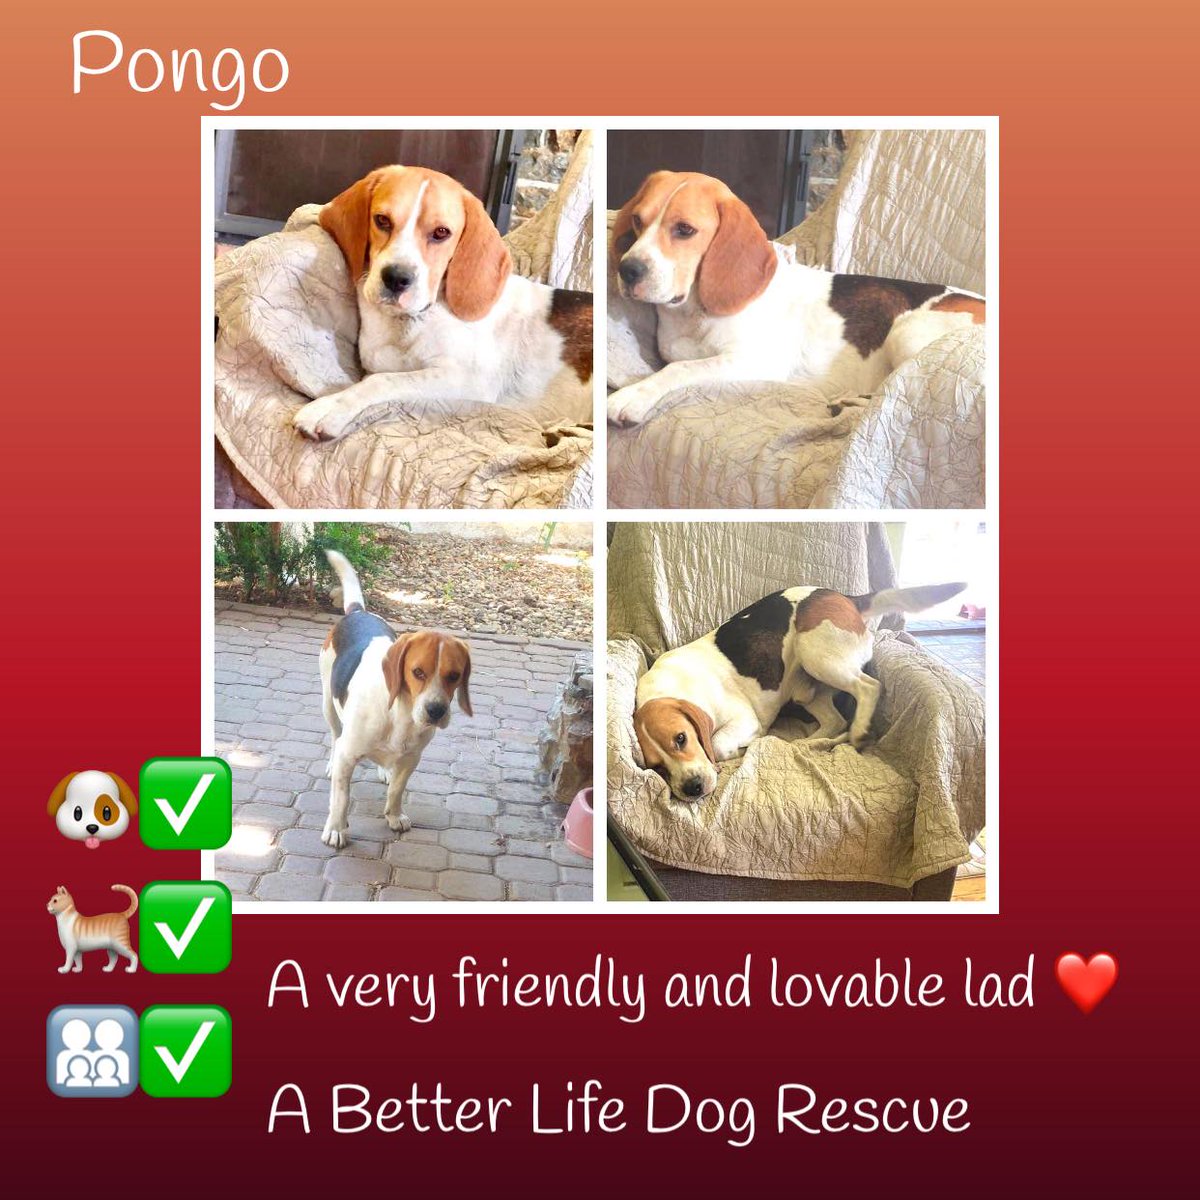 4yo Beagle mix PONGO was found abandoned. He had no chip & despite numerous enquiries, no one came to claim him, so he is now looking for a lovely home. He is currently living in a foster home in Romania with a female dog (who he loves), cats & children. He is very friendly, just